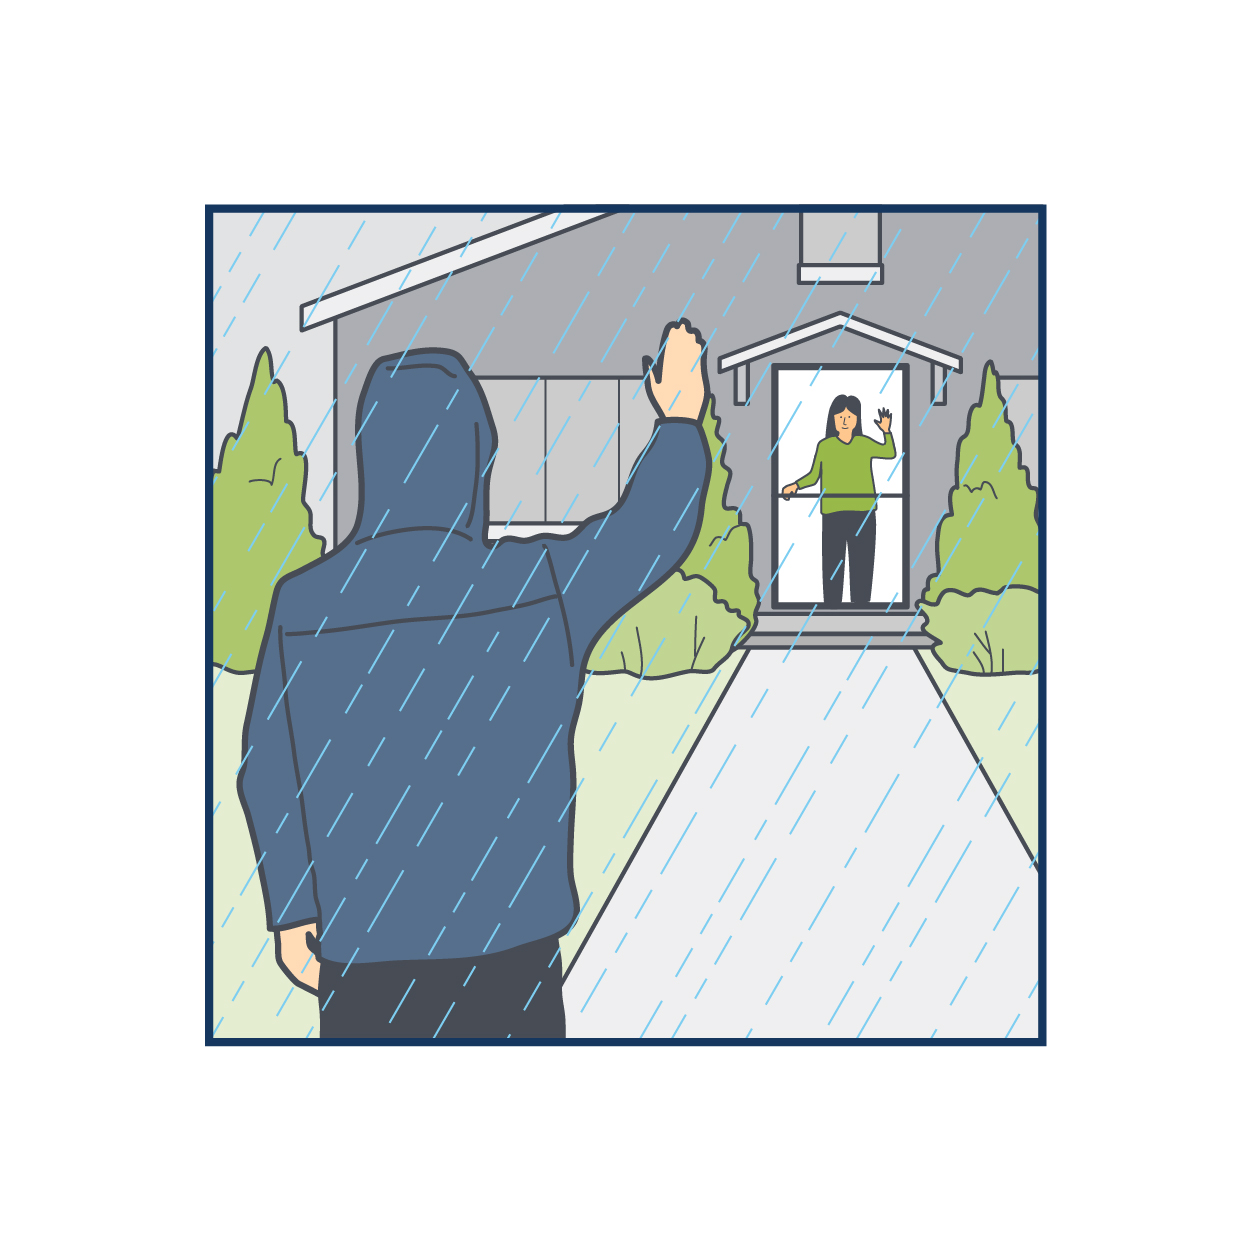 Person waving to another person inside a house while it is raining